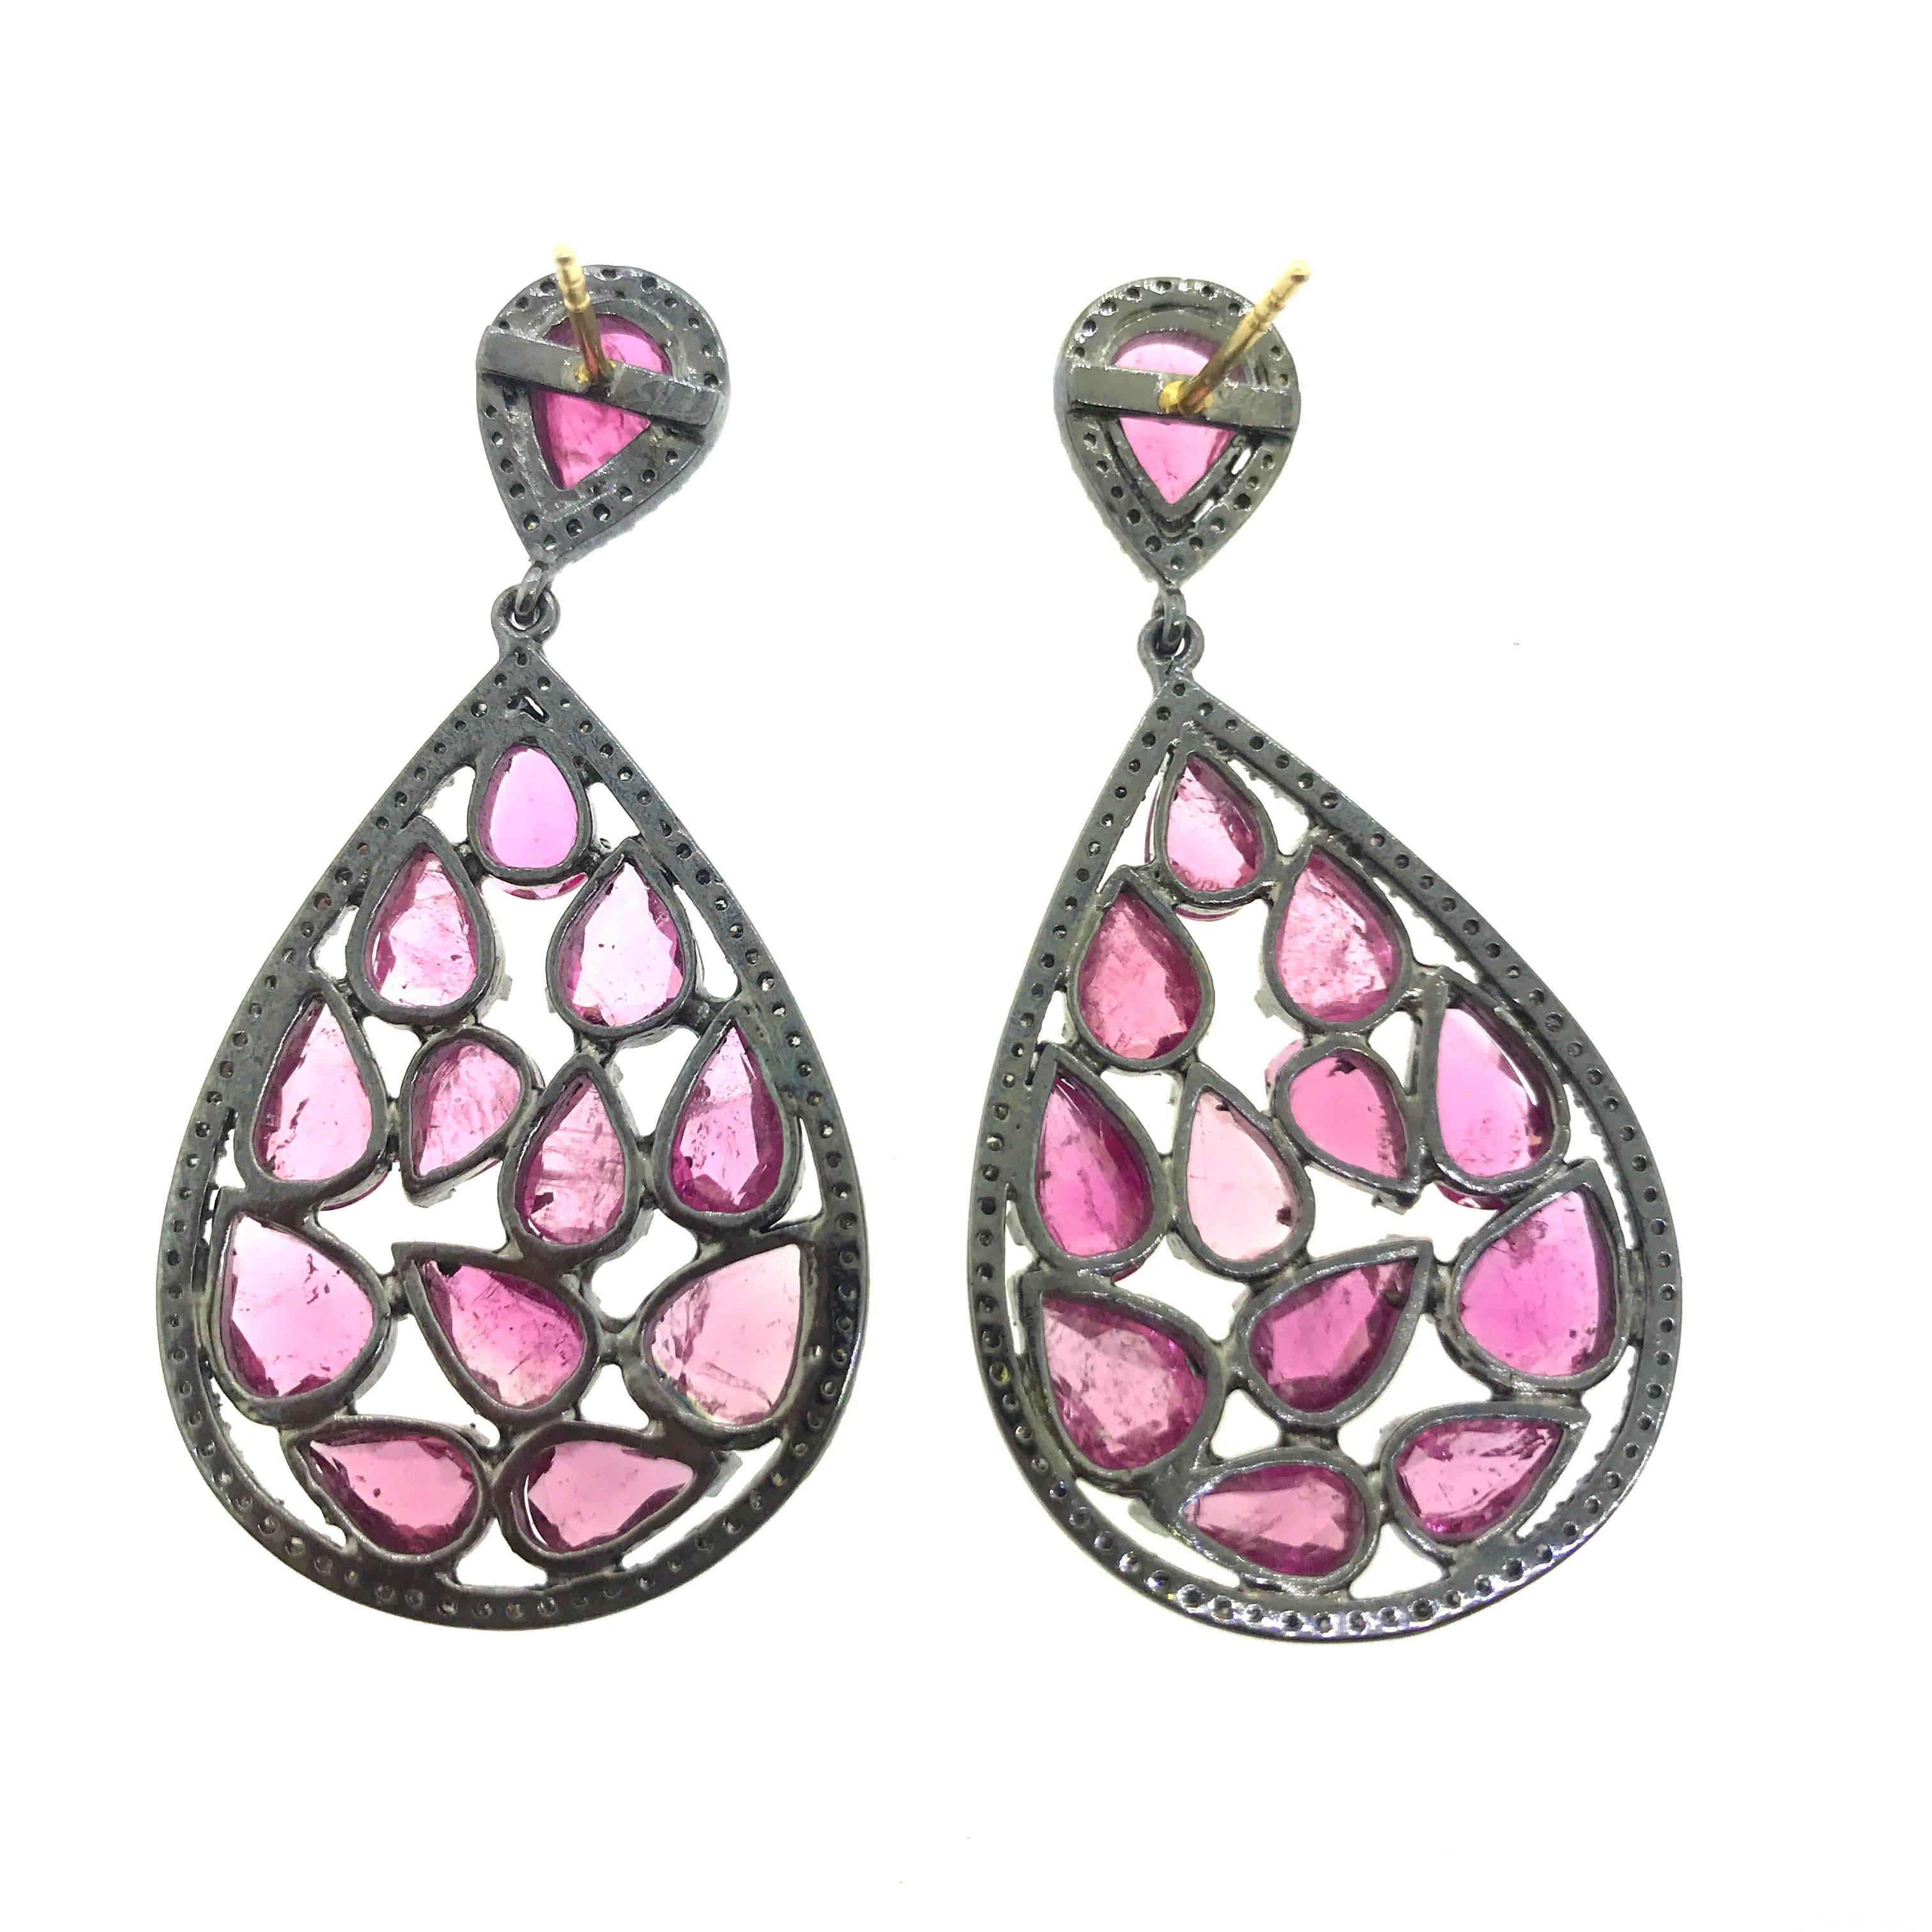 15.60 ct Tourmaline Diamond Earrings in Oxidized Sterling Silver with 14KT Gold In New Condition For Sale In New York, NY